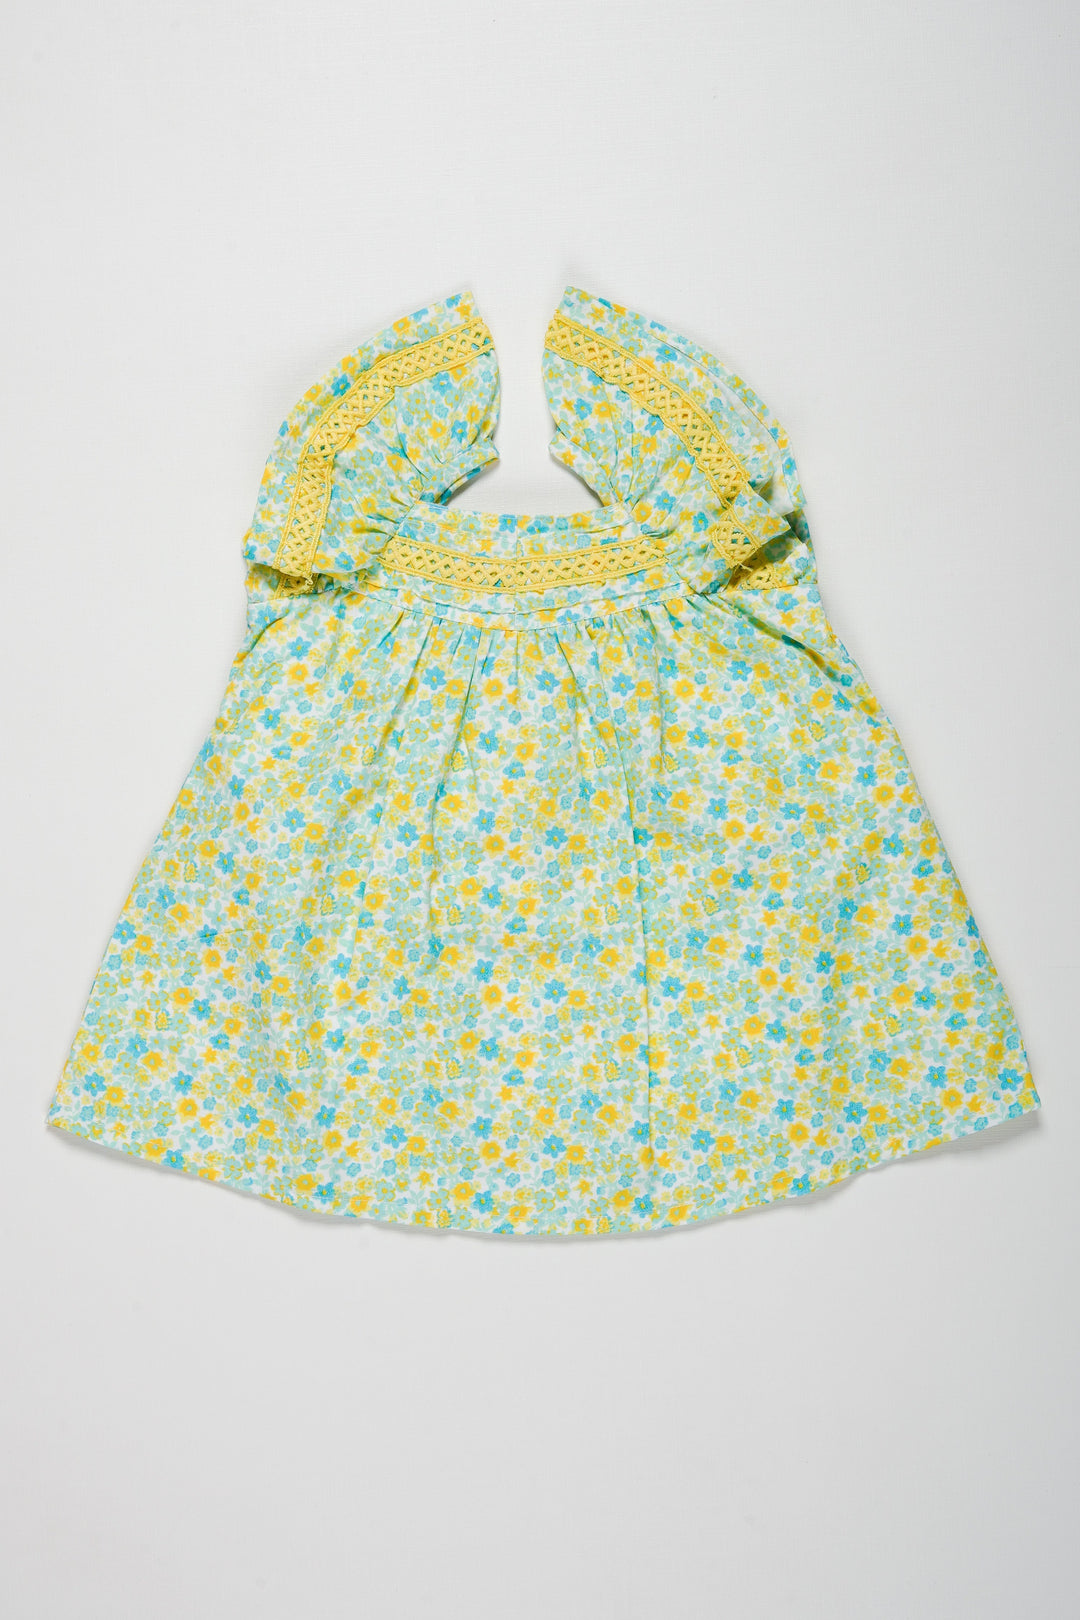 The Nesavu Baby Cotton Frocks Adorable Baby Girl Summer Cotton Frock with Floral Print Nesavu 14 (6M) / Green / Cotton BFJ558A-14 Buy Baby Girl Cotton Floral Frock Online | Summer Collection for Infants | The Nesavu